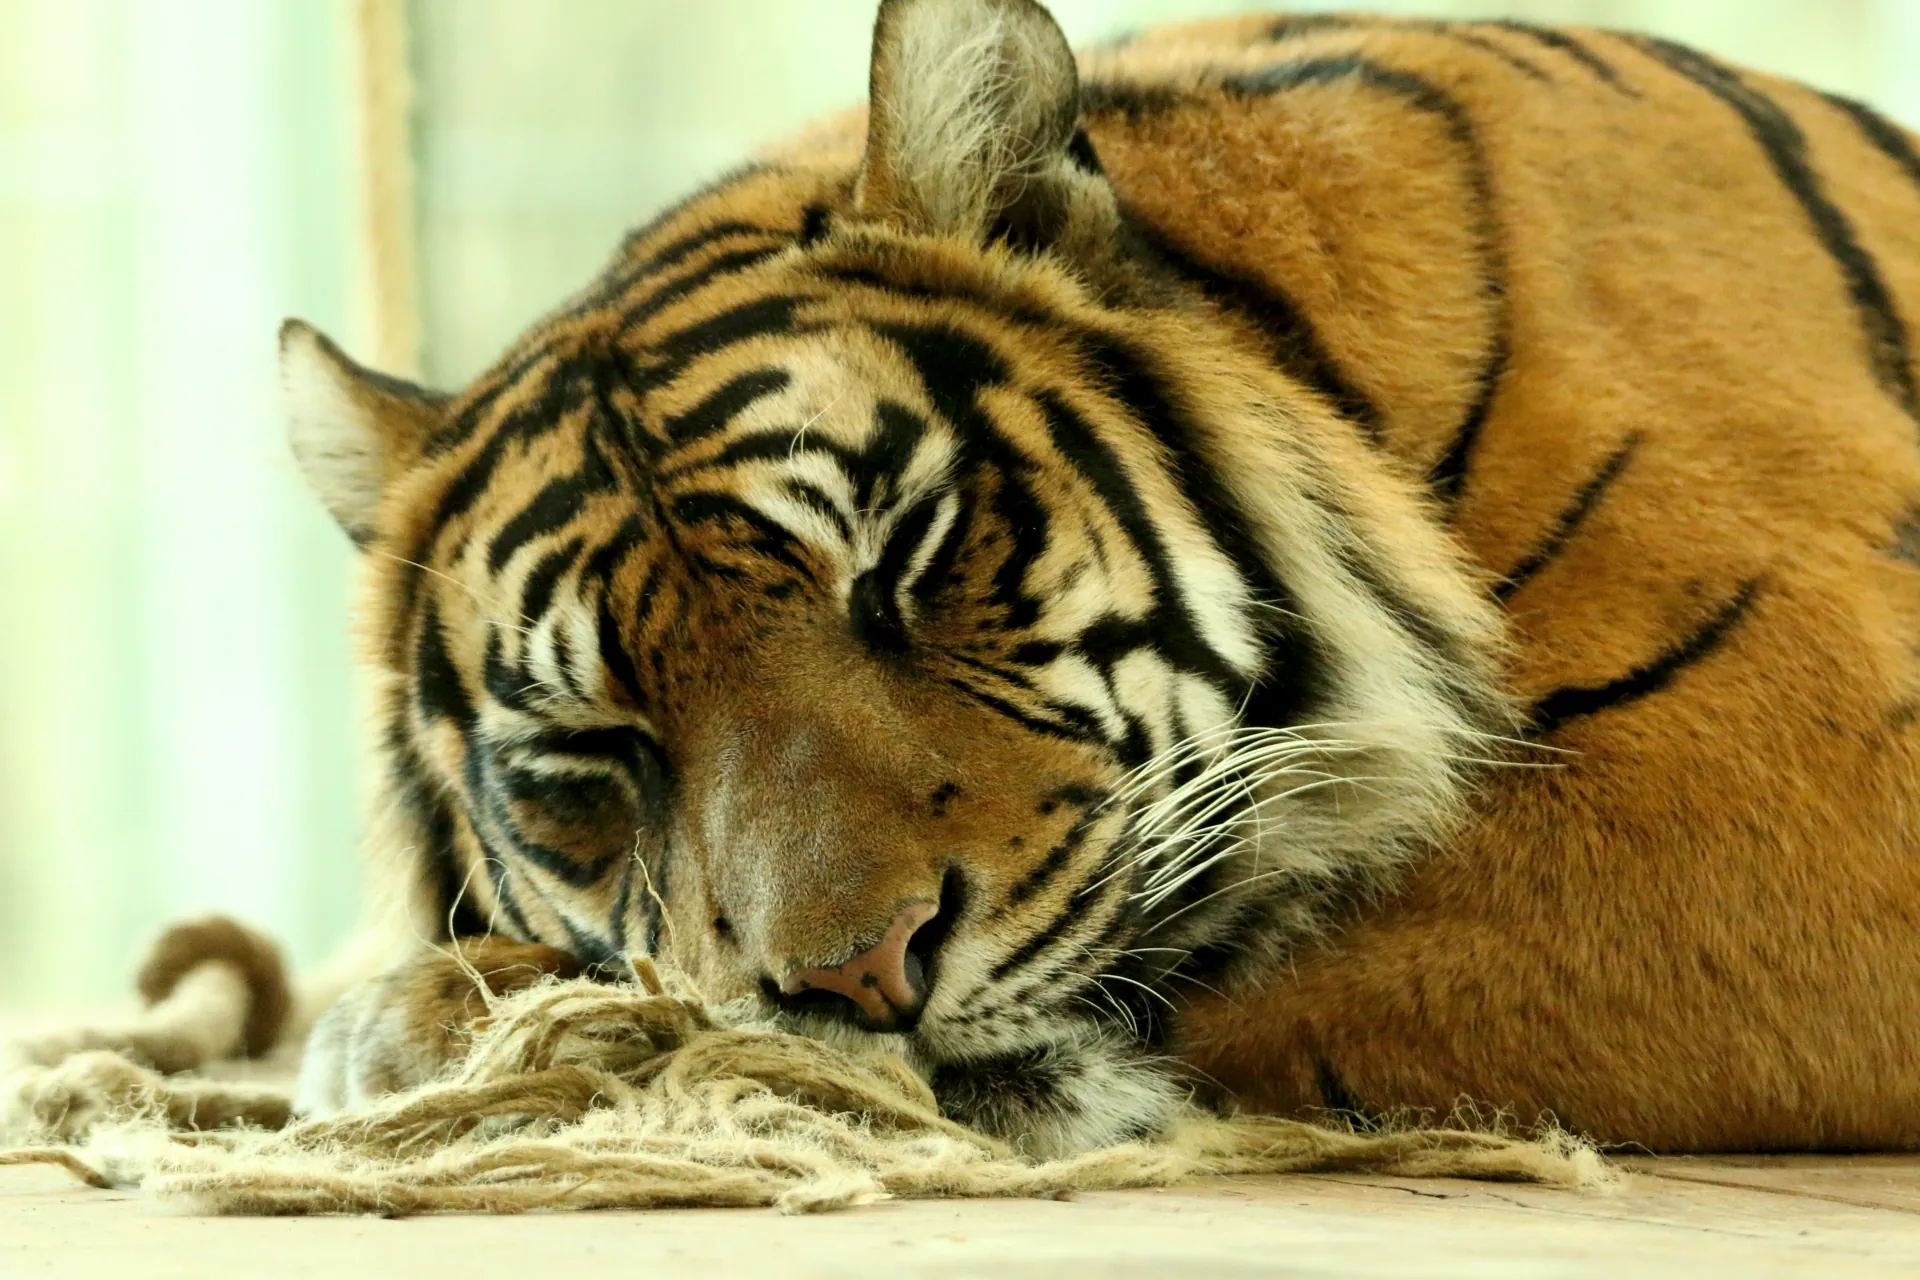 A sleeping tiger on a large wooden platform, eyes are closed.